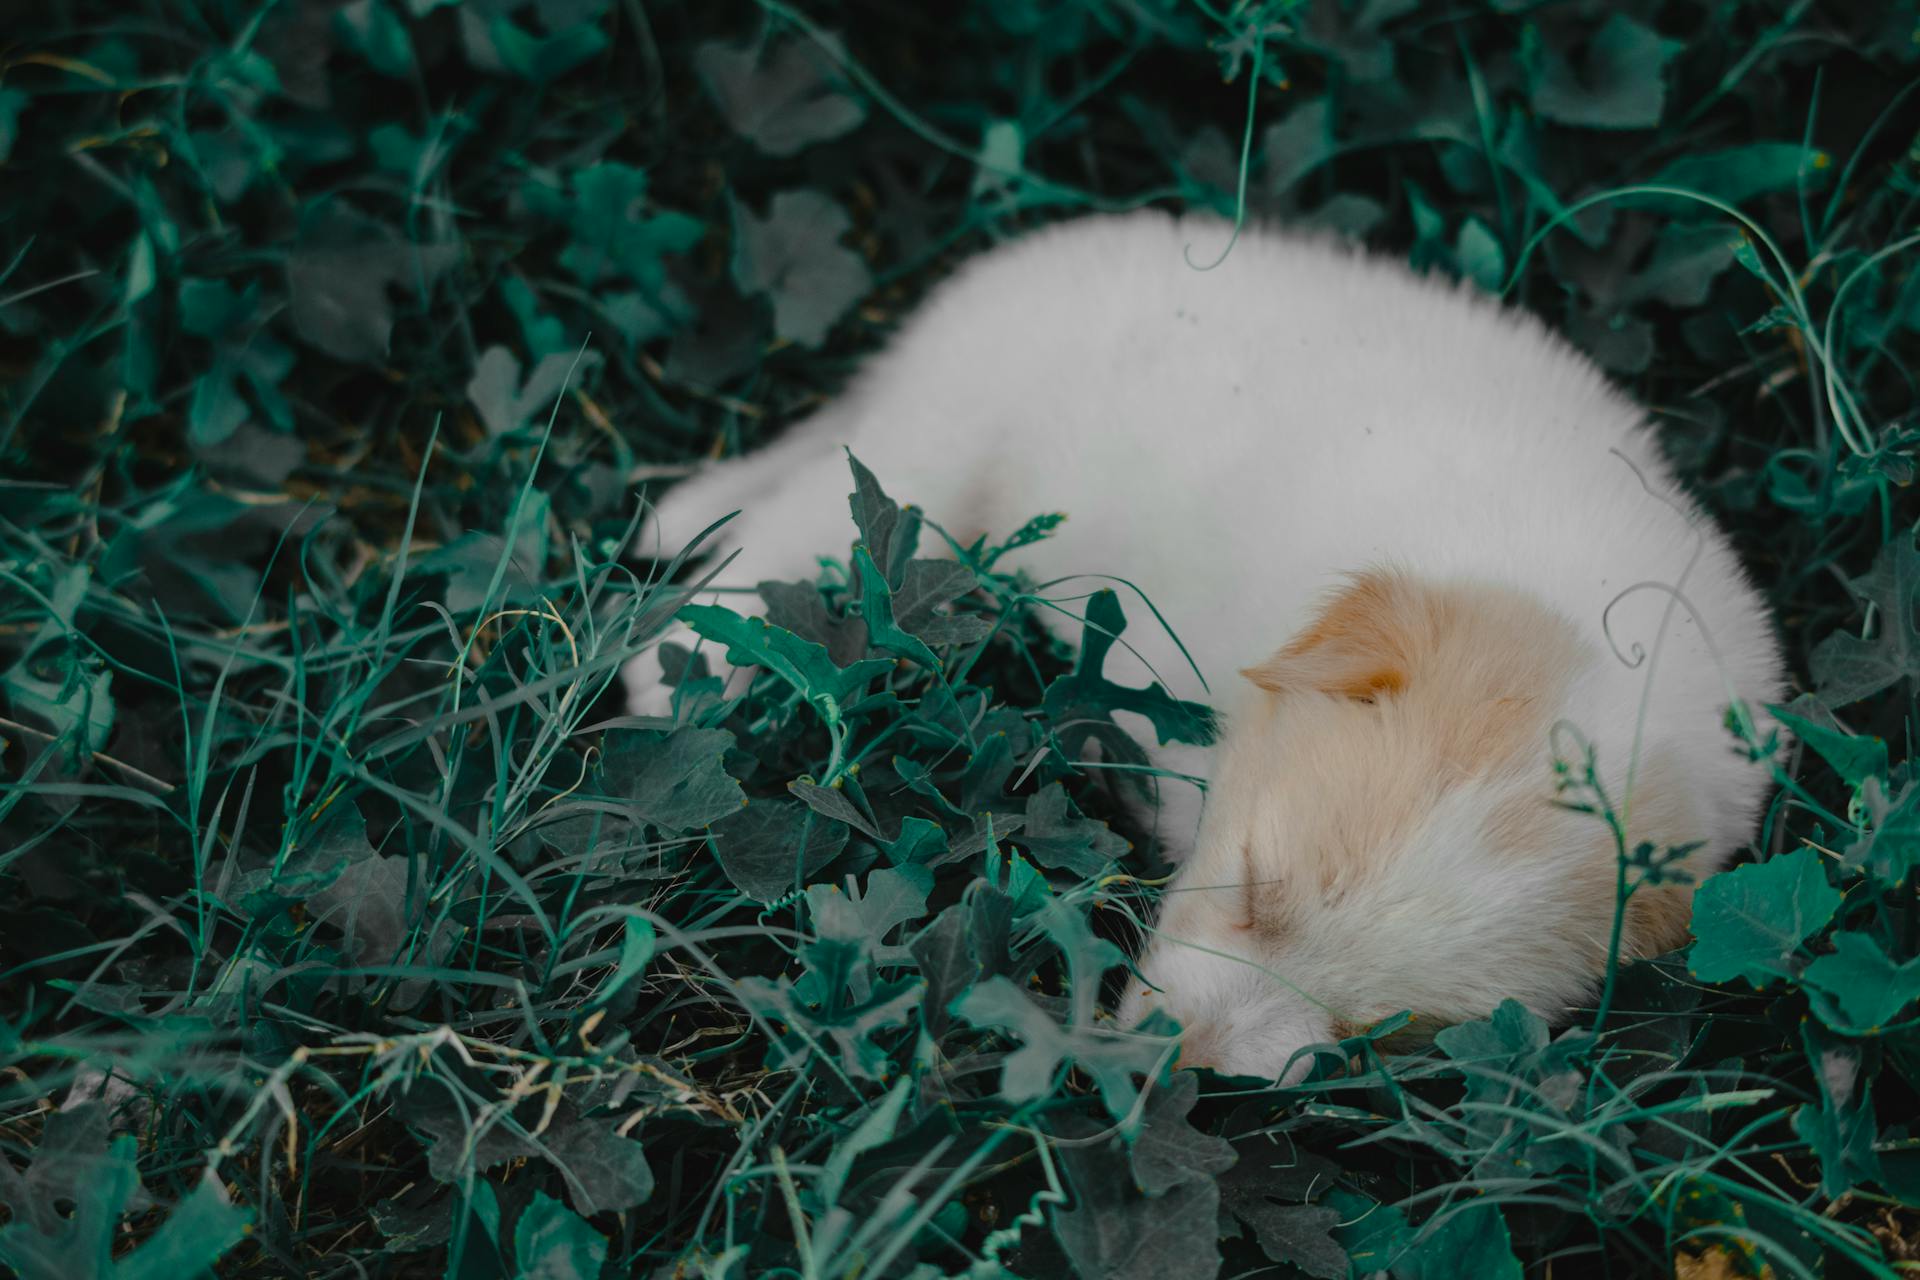 A white puppy sleeping curled up in a garden